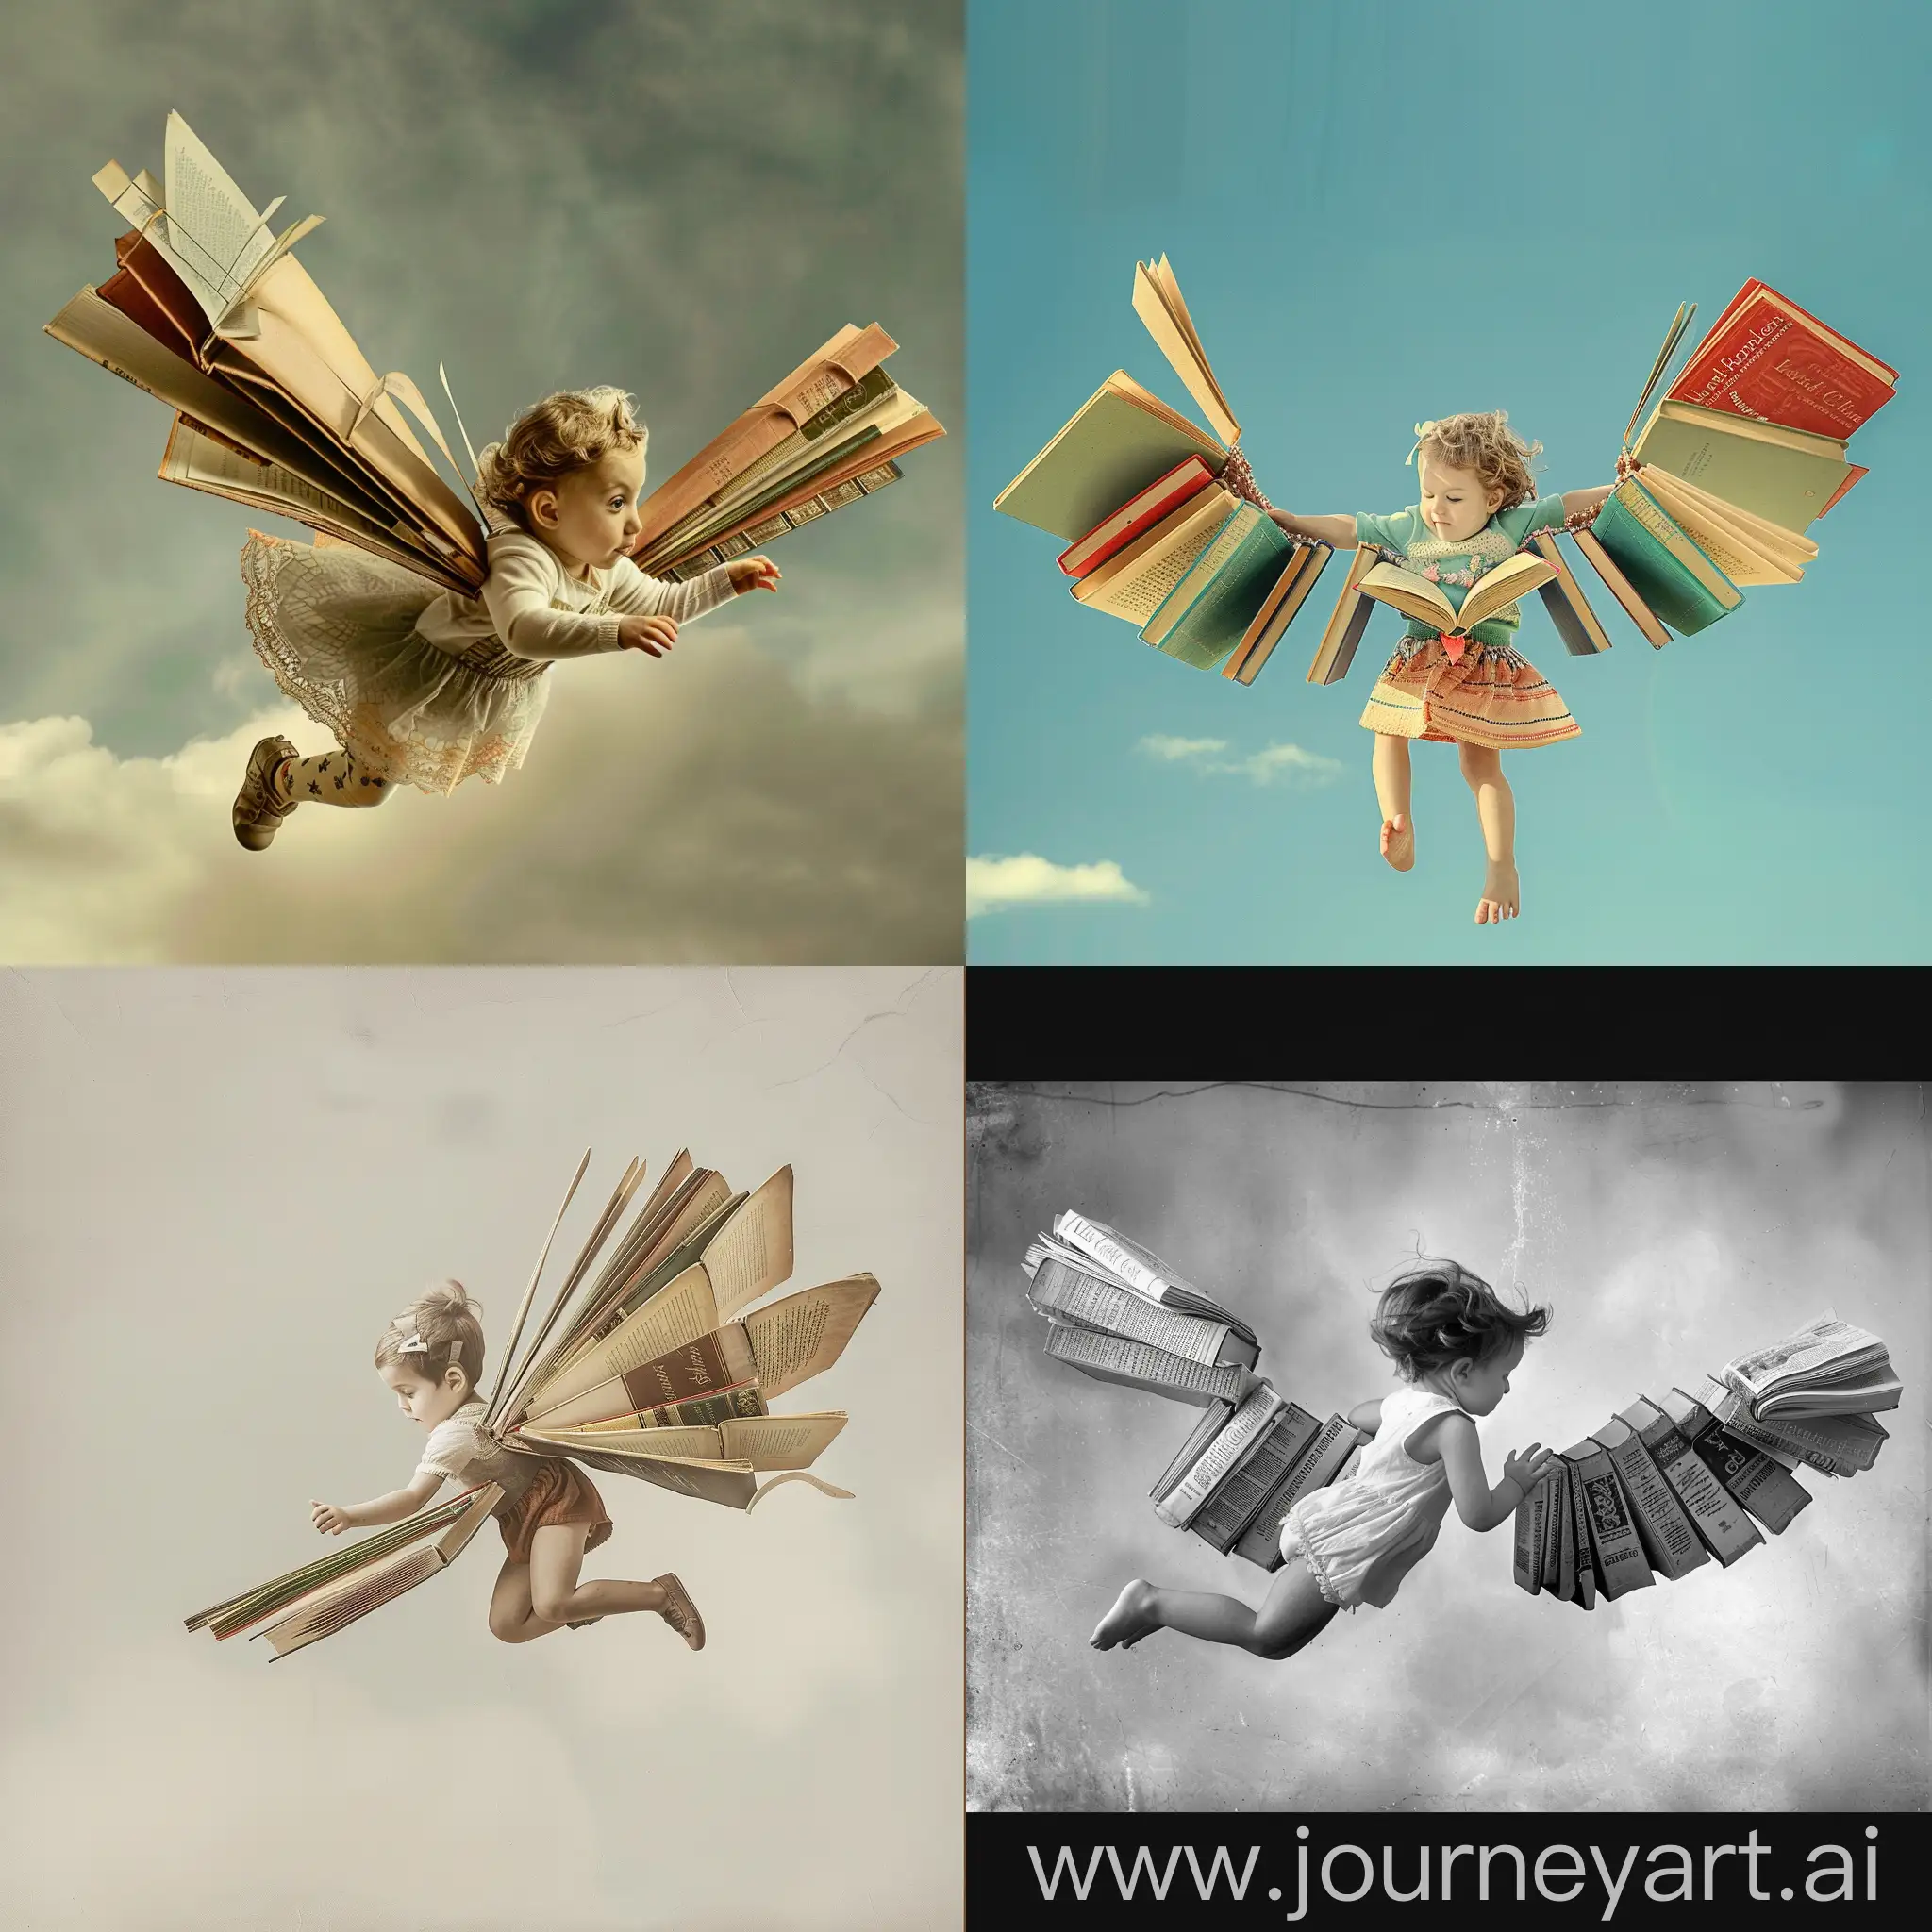 Child flying with wings made with books